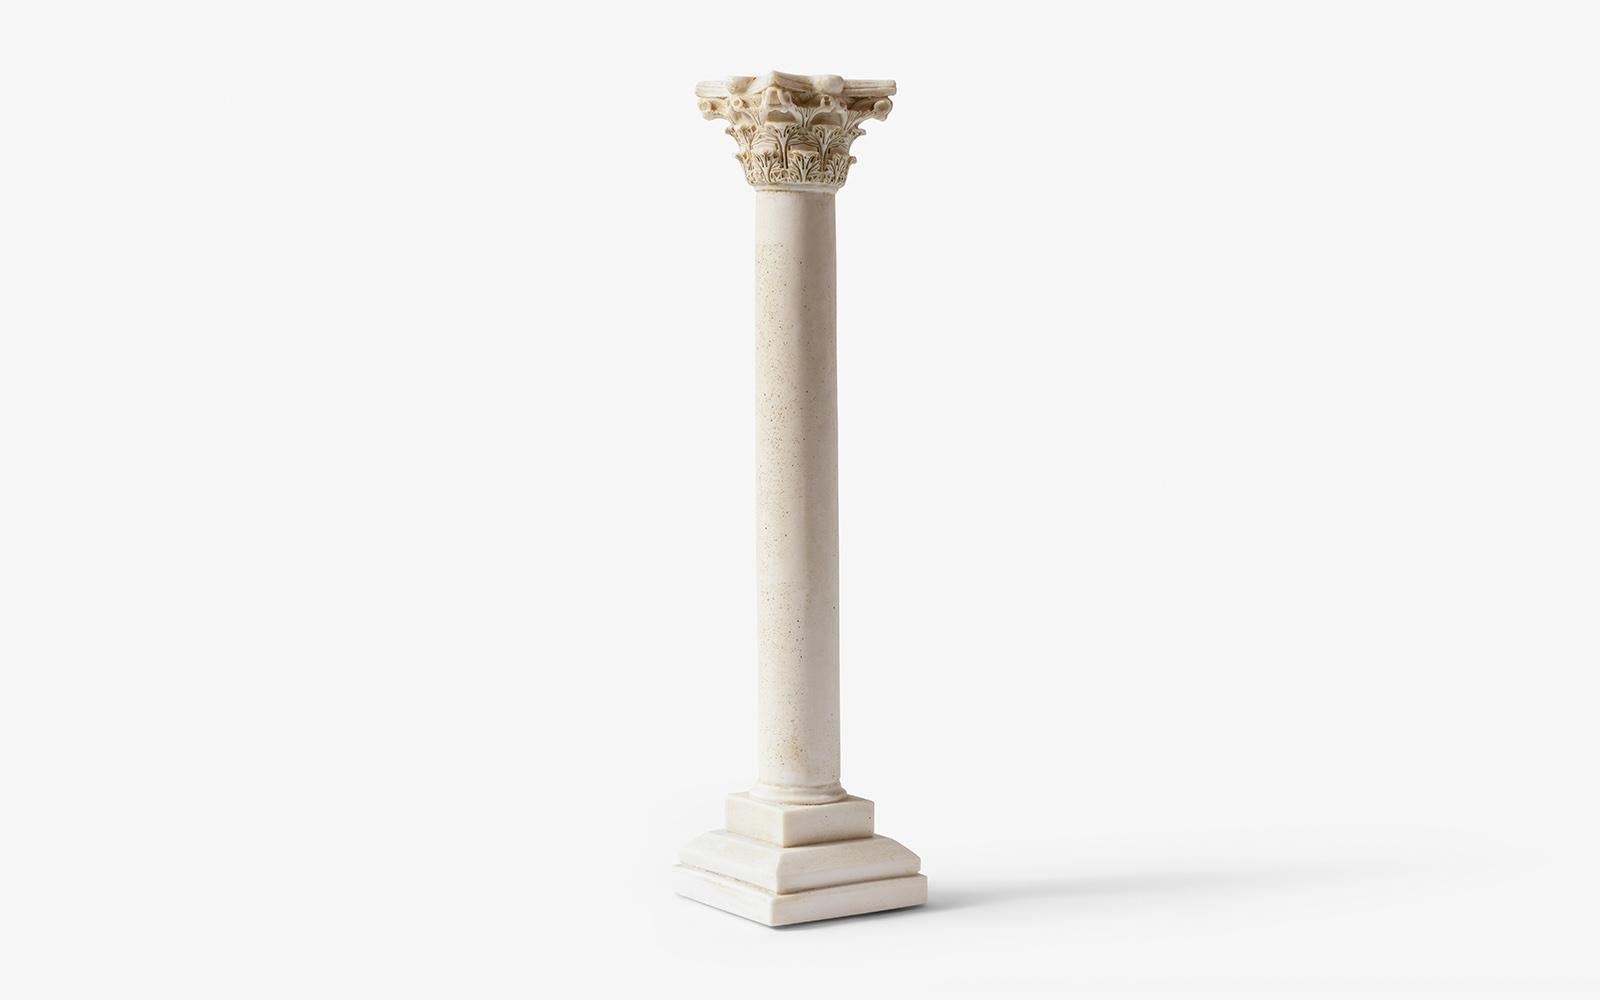 Weight: 2,5 kg

-Produced from pressed marble powder.
-Produced from the original molds of the works from the museum.
-Can be used indoors and outdoors.

Columns named after the ancient Greek city of Corinth, BC. It originated in Athens in the 5th